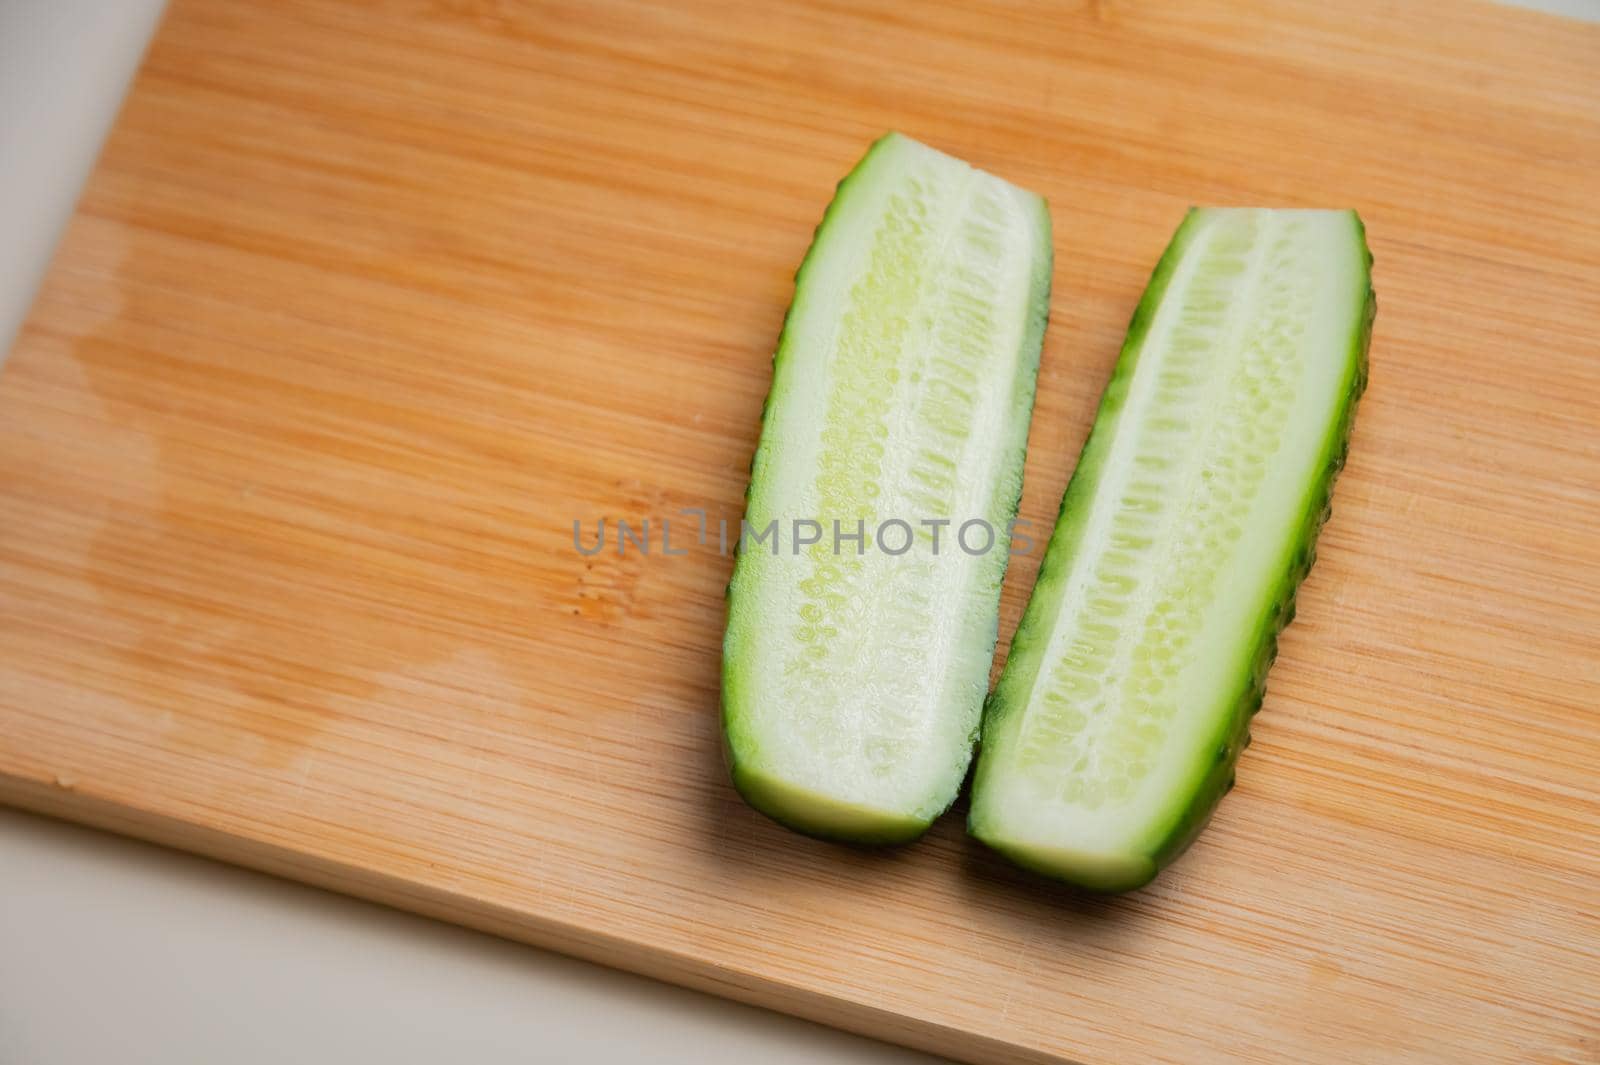 juicy ripe cucumber cut in half lies on a wooden cutting board. top view, shooting on the table.